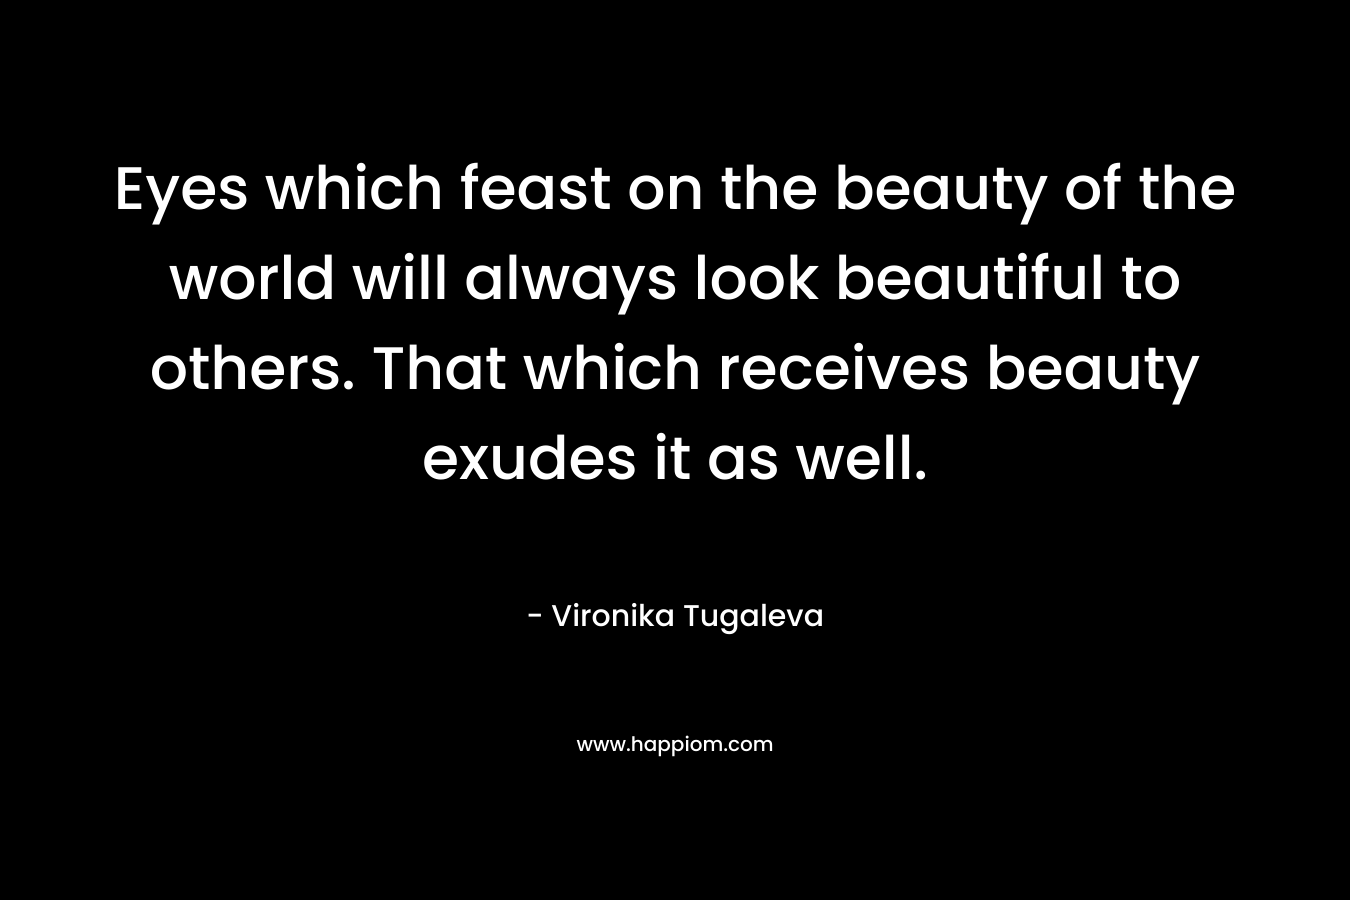 Eyes which feast on the beauty of the world will always look beautiful to others. That which receives beauty exudes it as well.